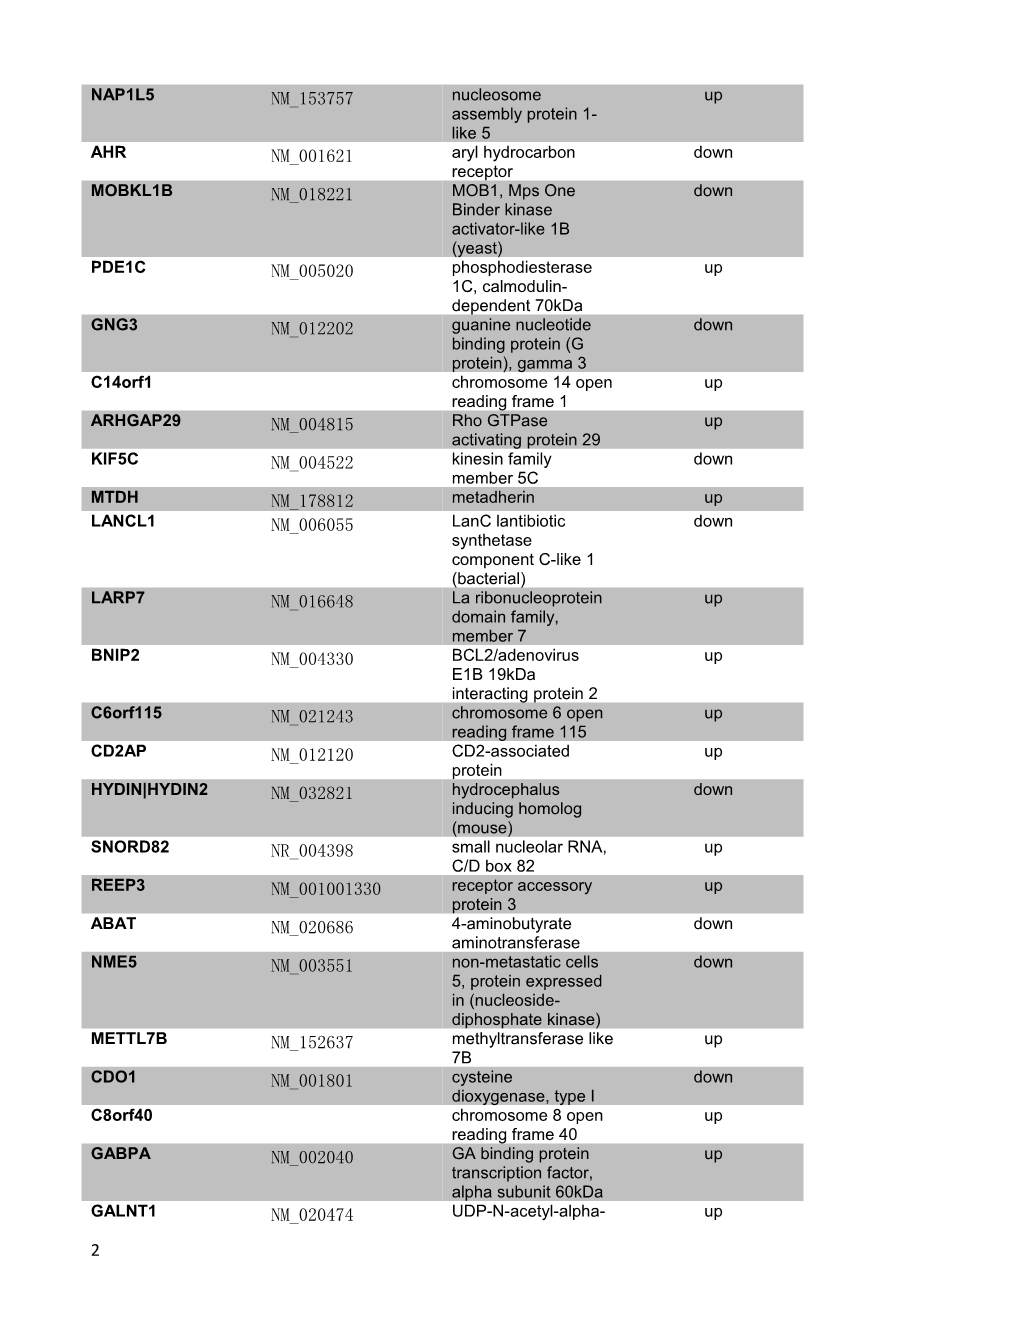 Supplementary Table 1: Knockdown of -Catenin in Astrocytes Alters Expression of 150 Genes